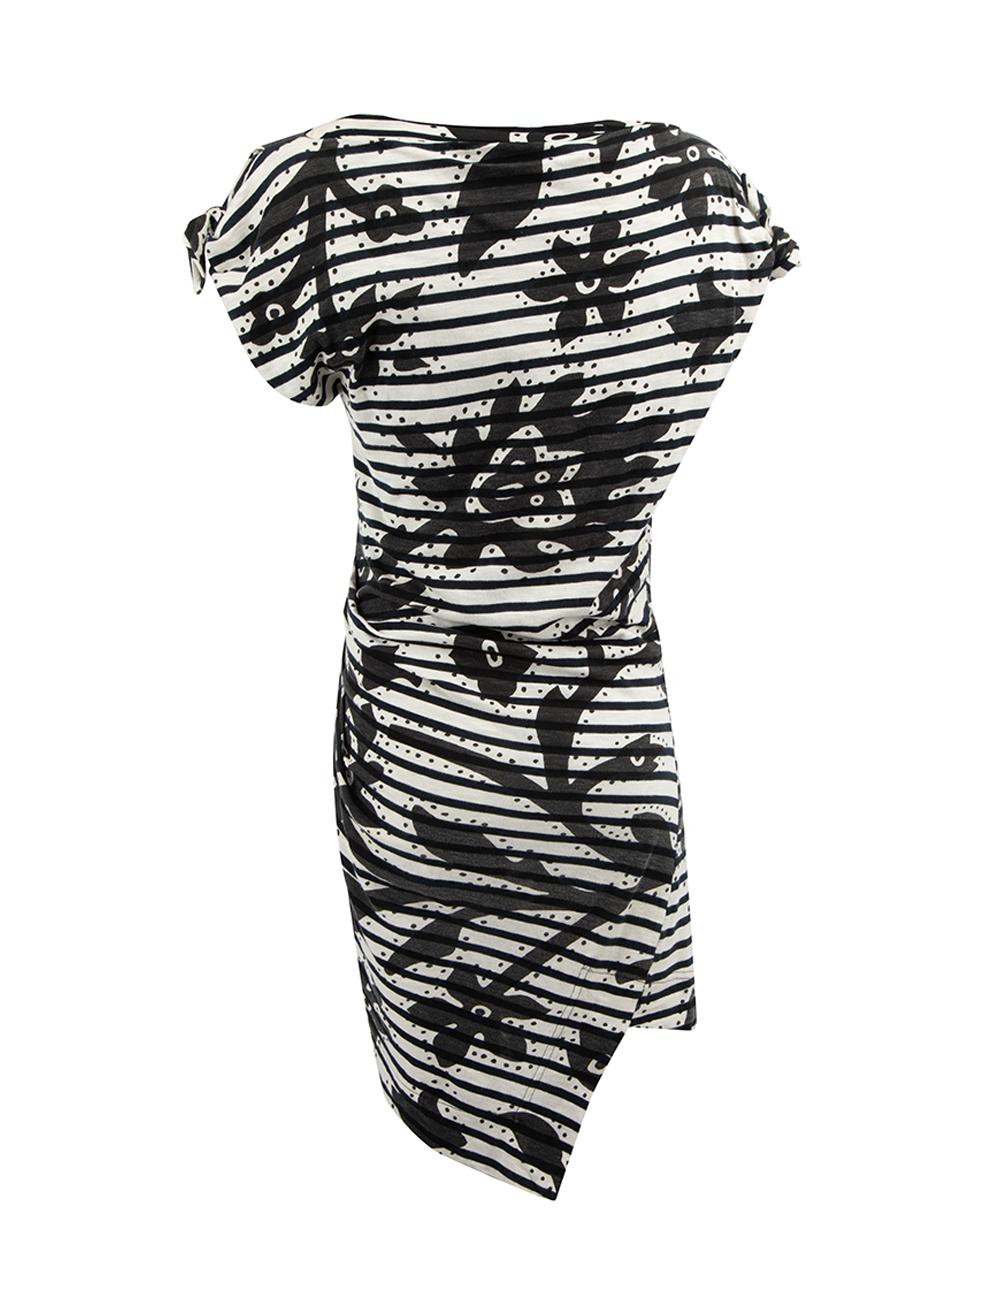 Vivienne Westwood Anglomania Navy & White Cotton Stripes Print Dress Size XS In Good Condition For Sale In London, GB